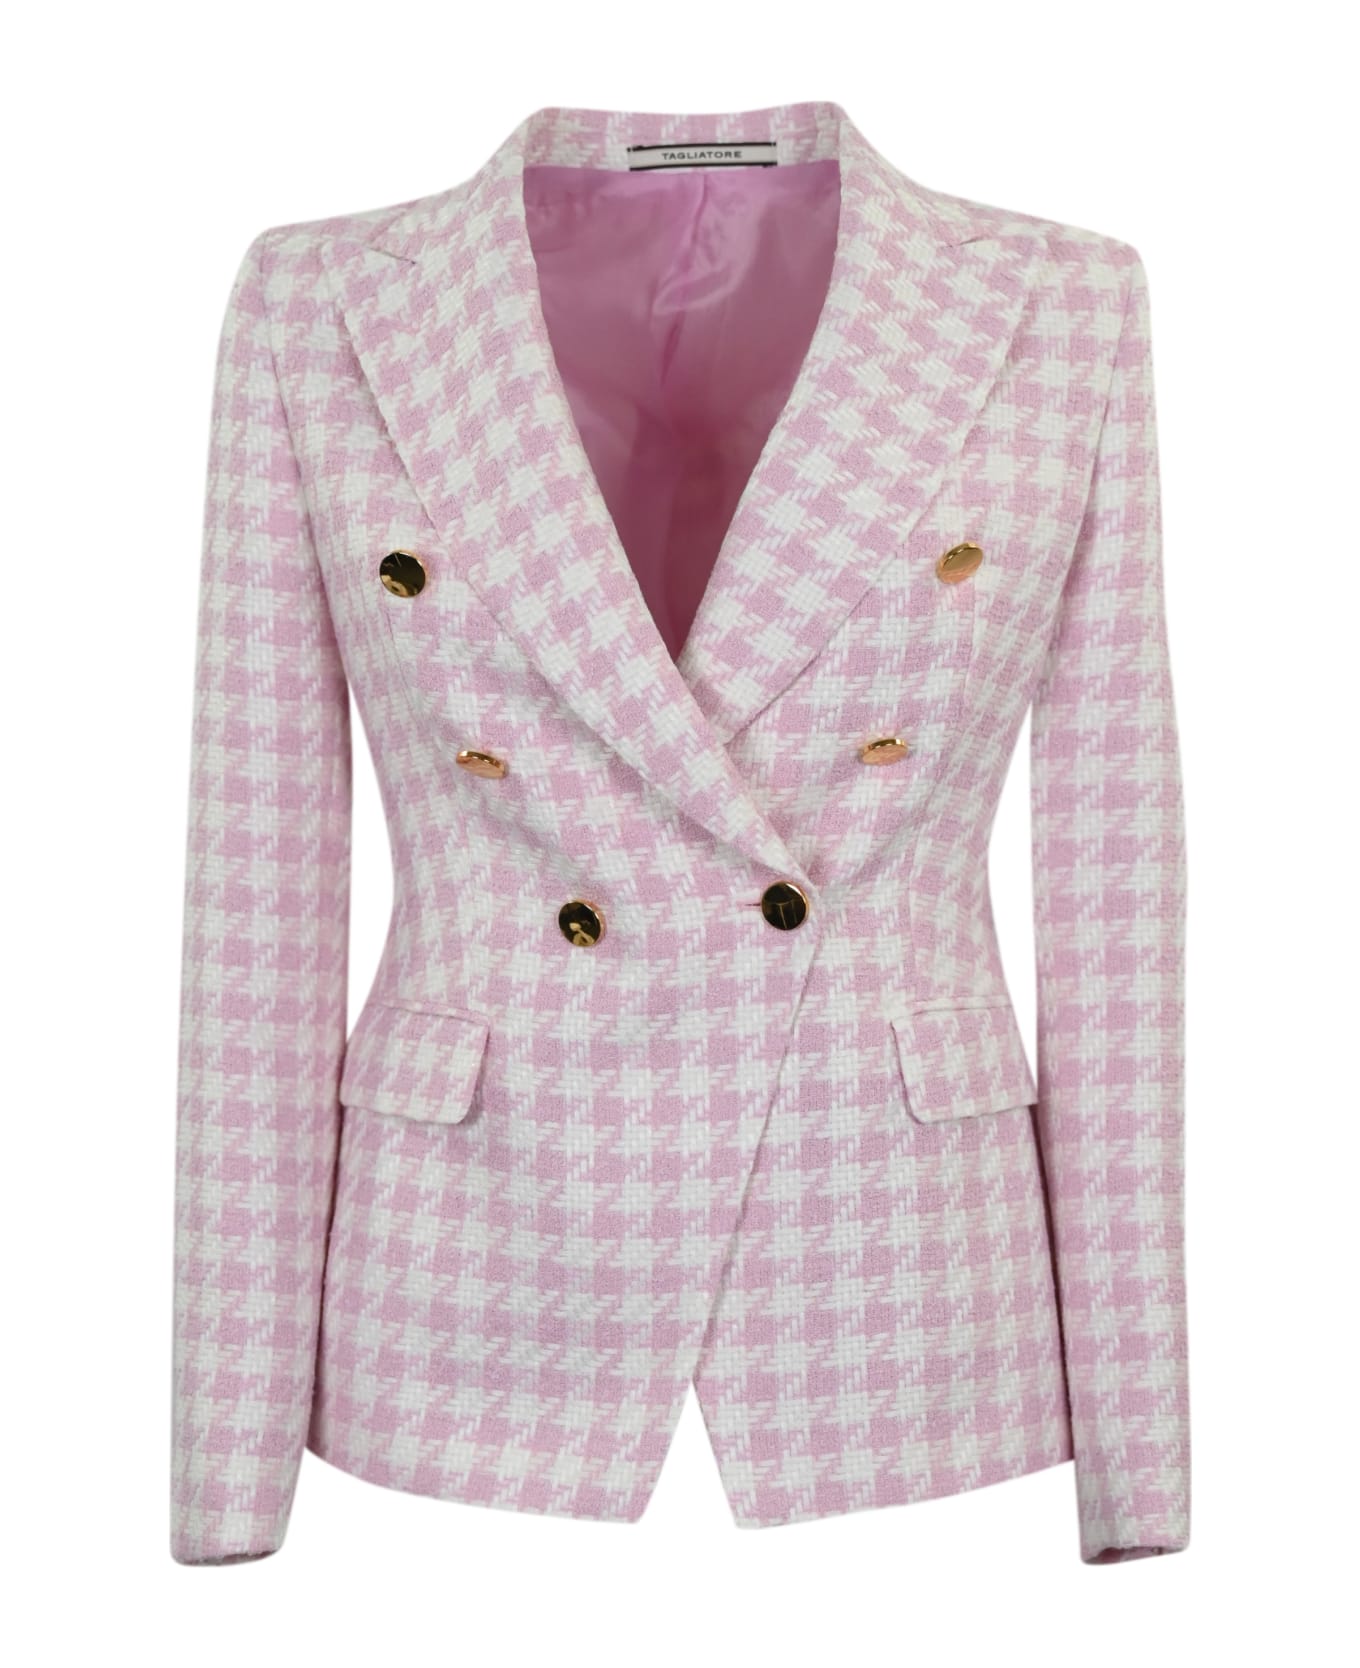 Tagliatore J-alicya Double-breasted Jacket In Pink And White - Rosa/bianco